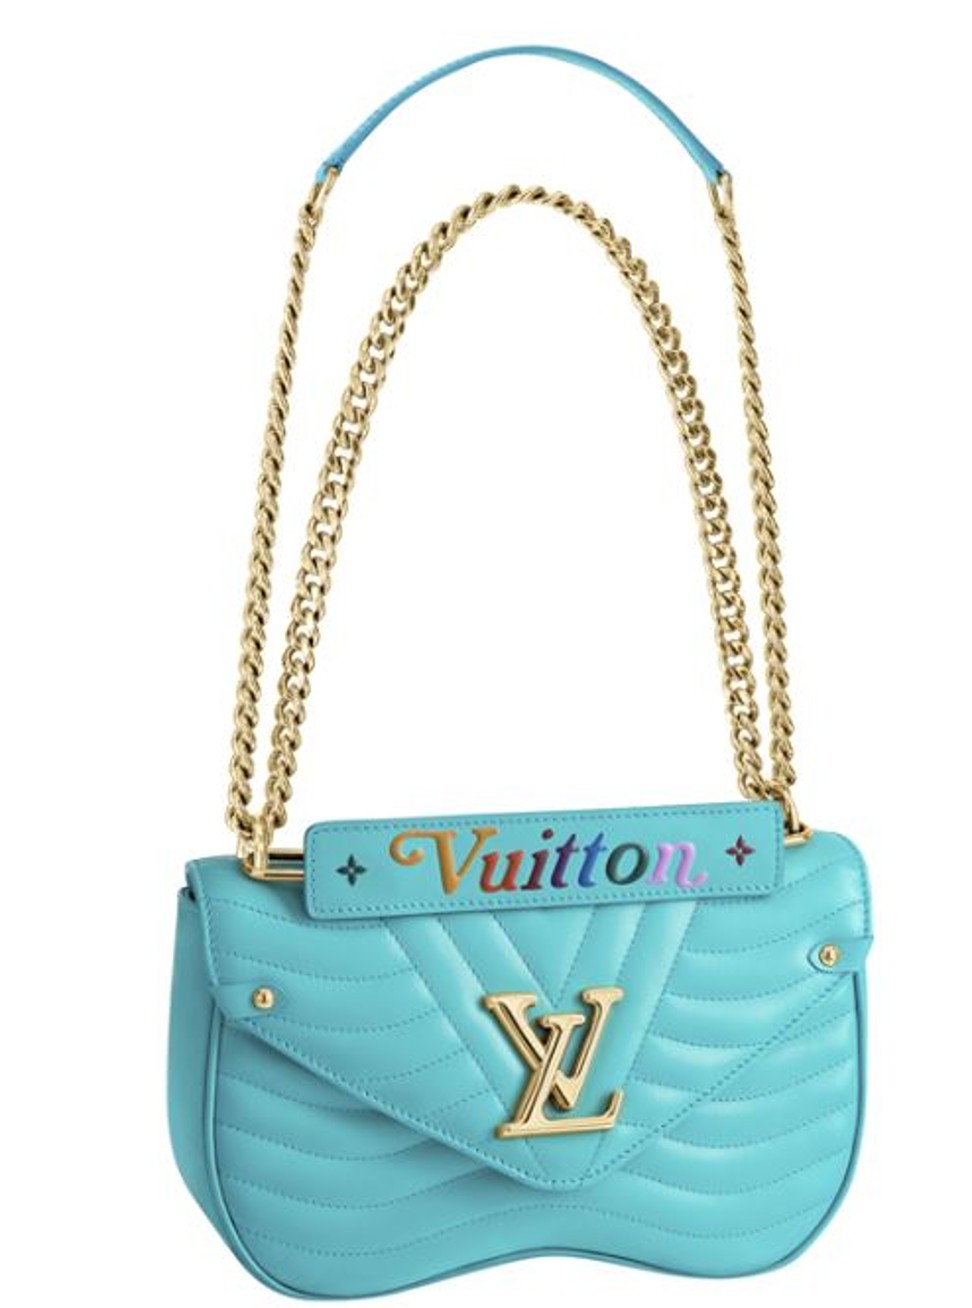 WHAT FITS IN MY LOUIS VUITTON NEW WAVE CHAIN BAG